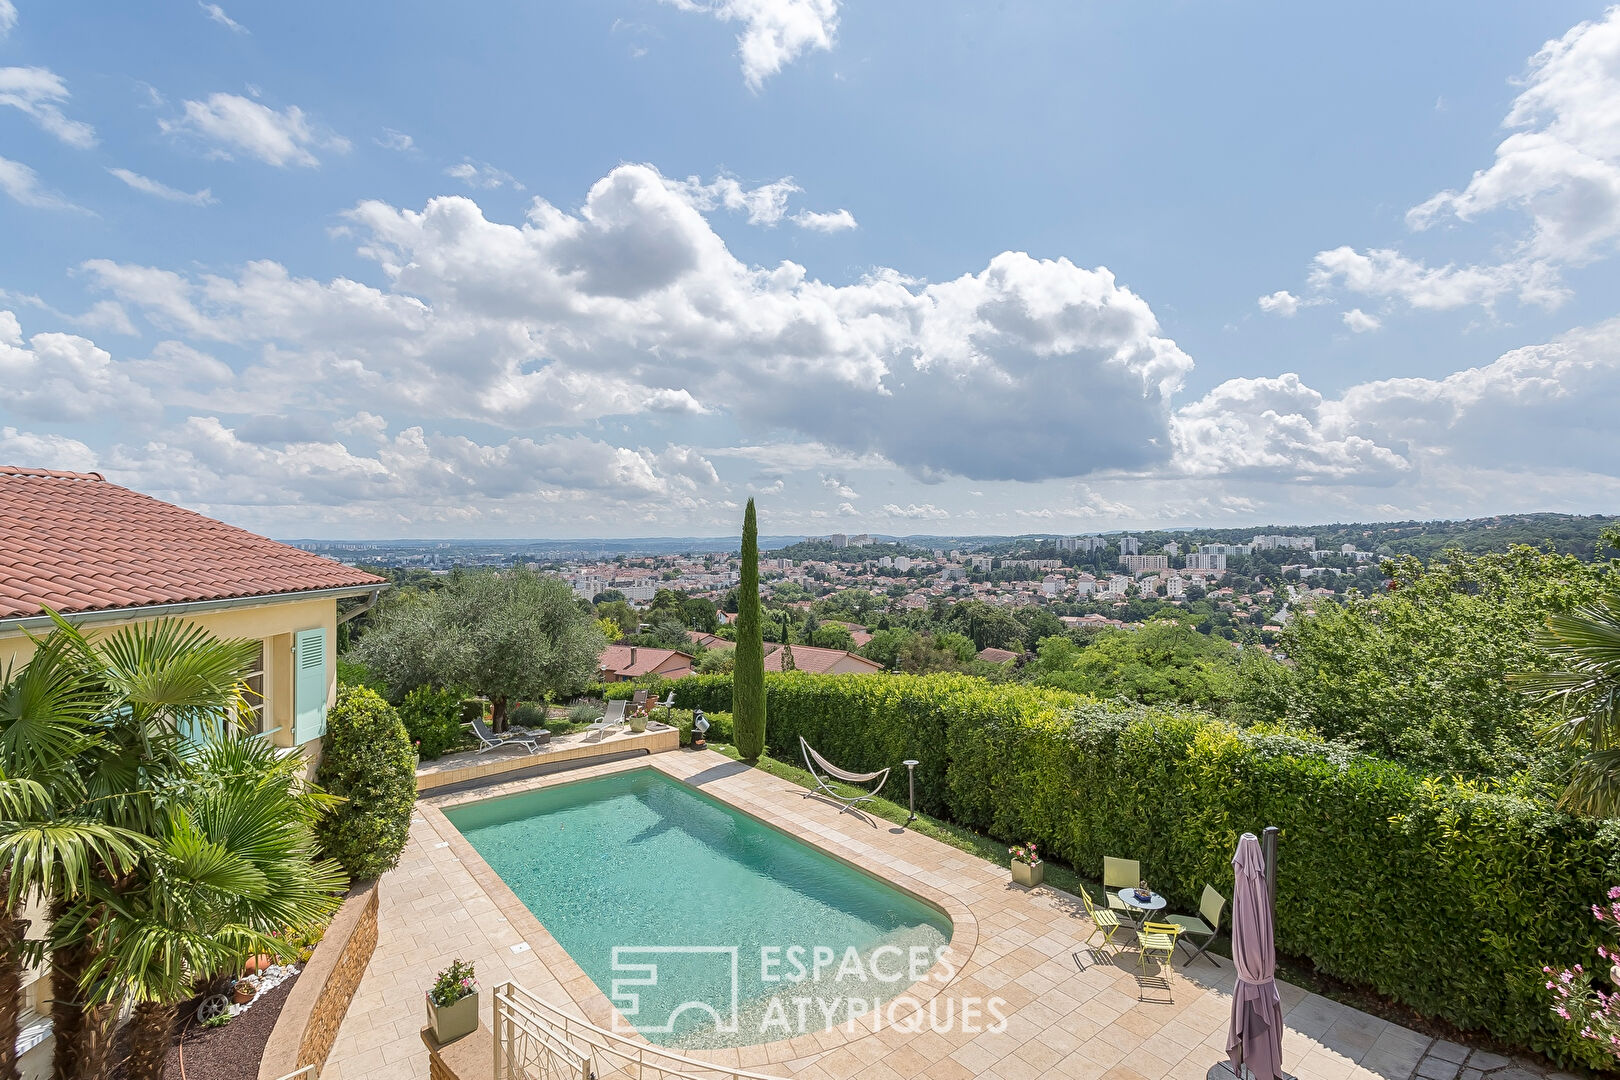 270m2 villa with swimming pool and breathtaking view